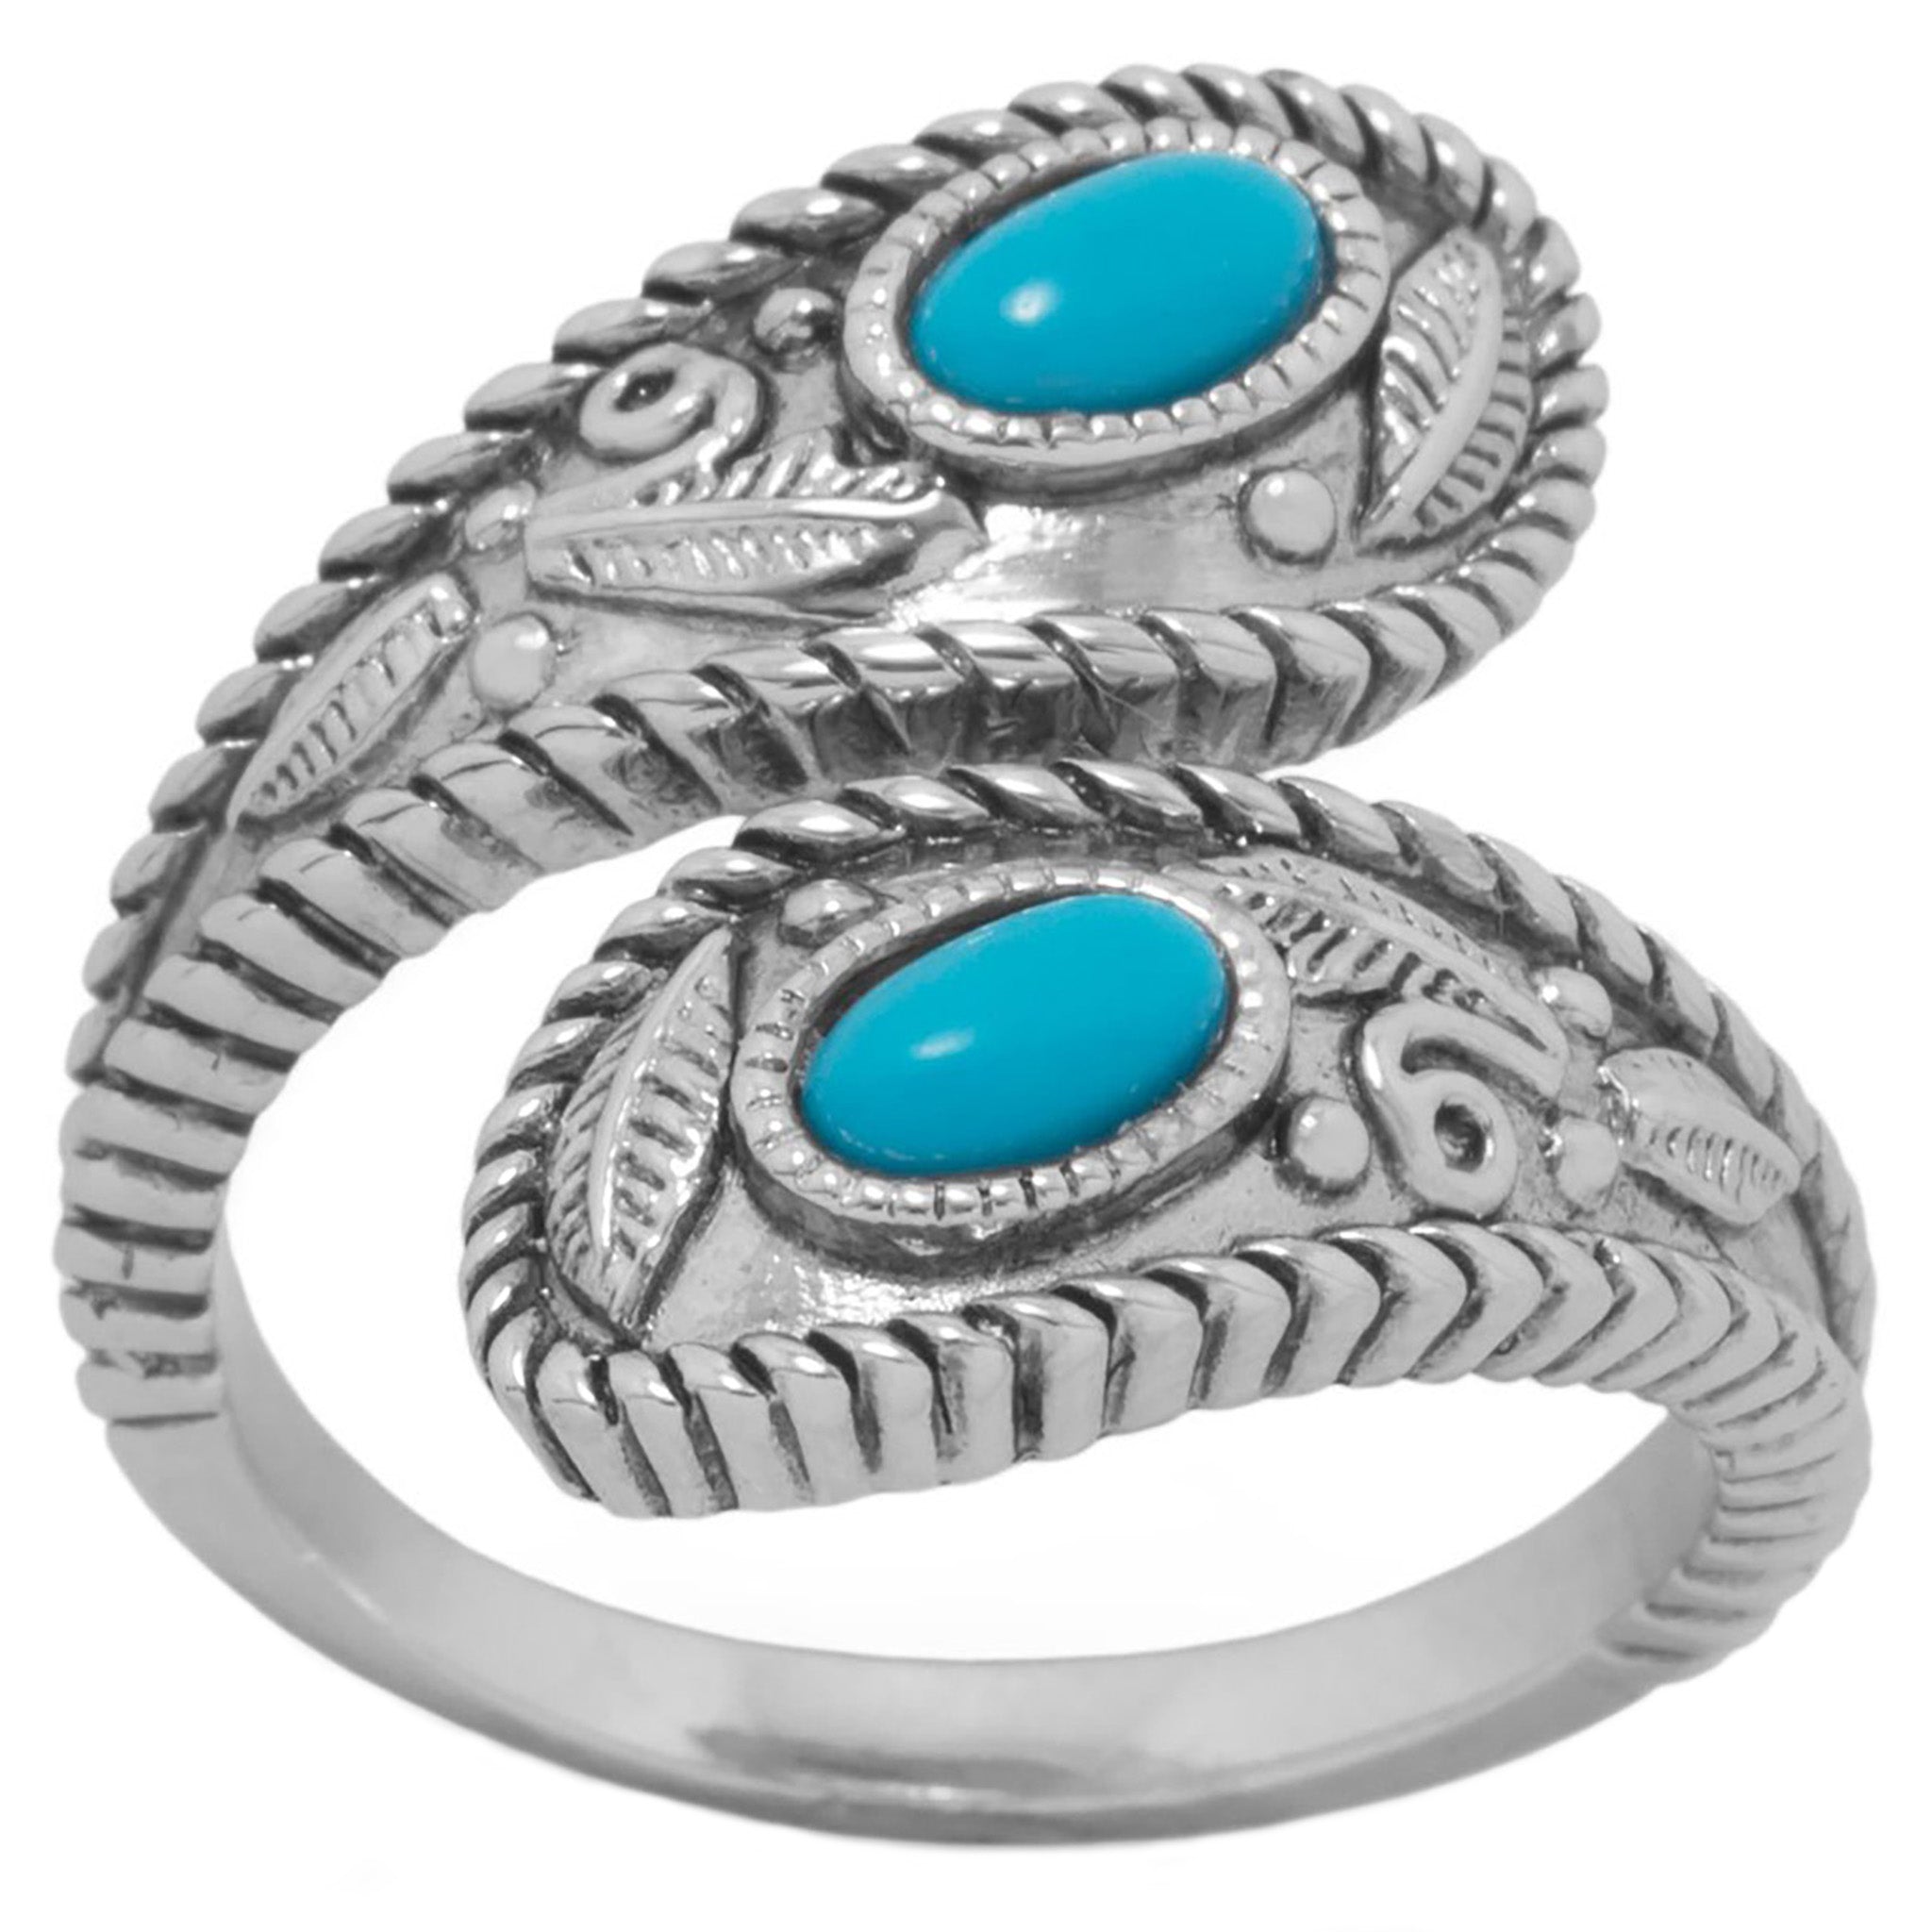 Dual Turquoise Spoon Ring